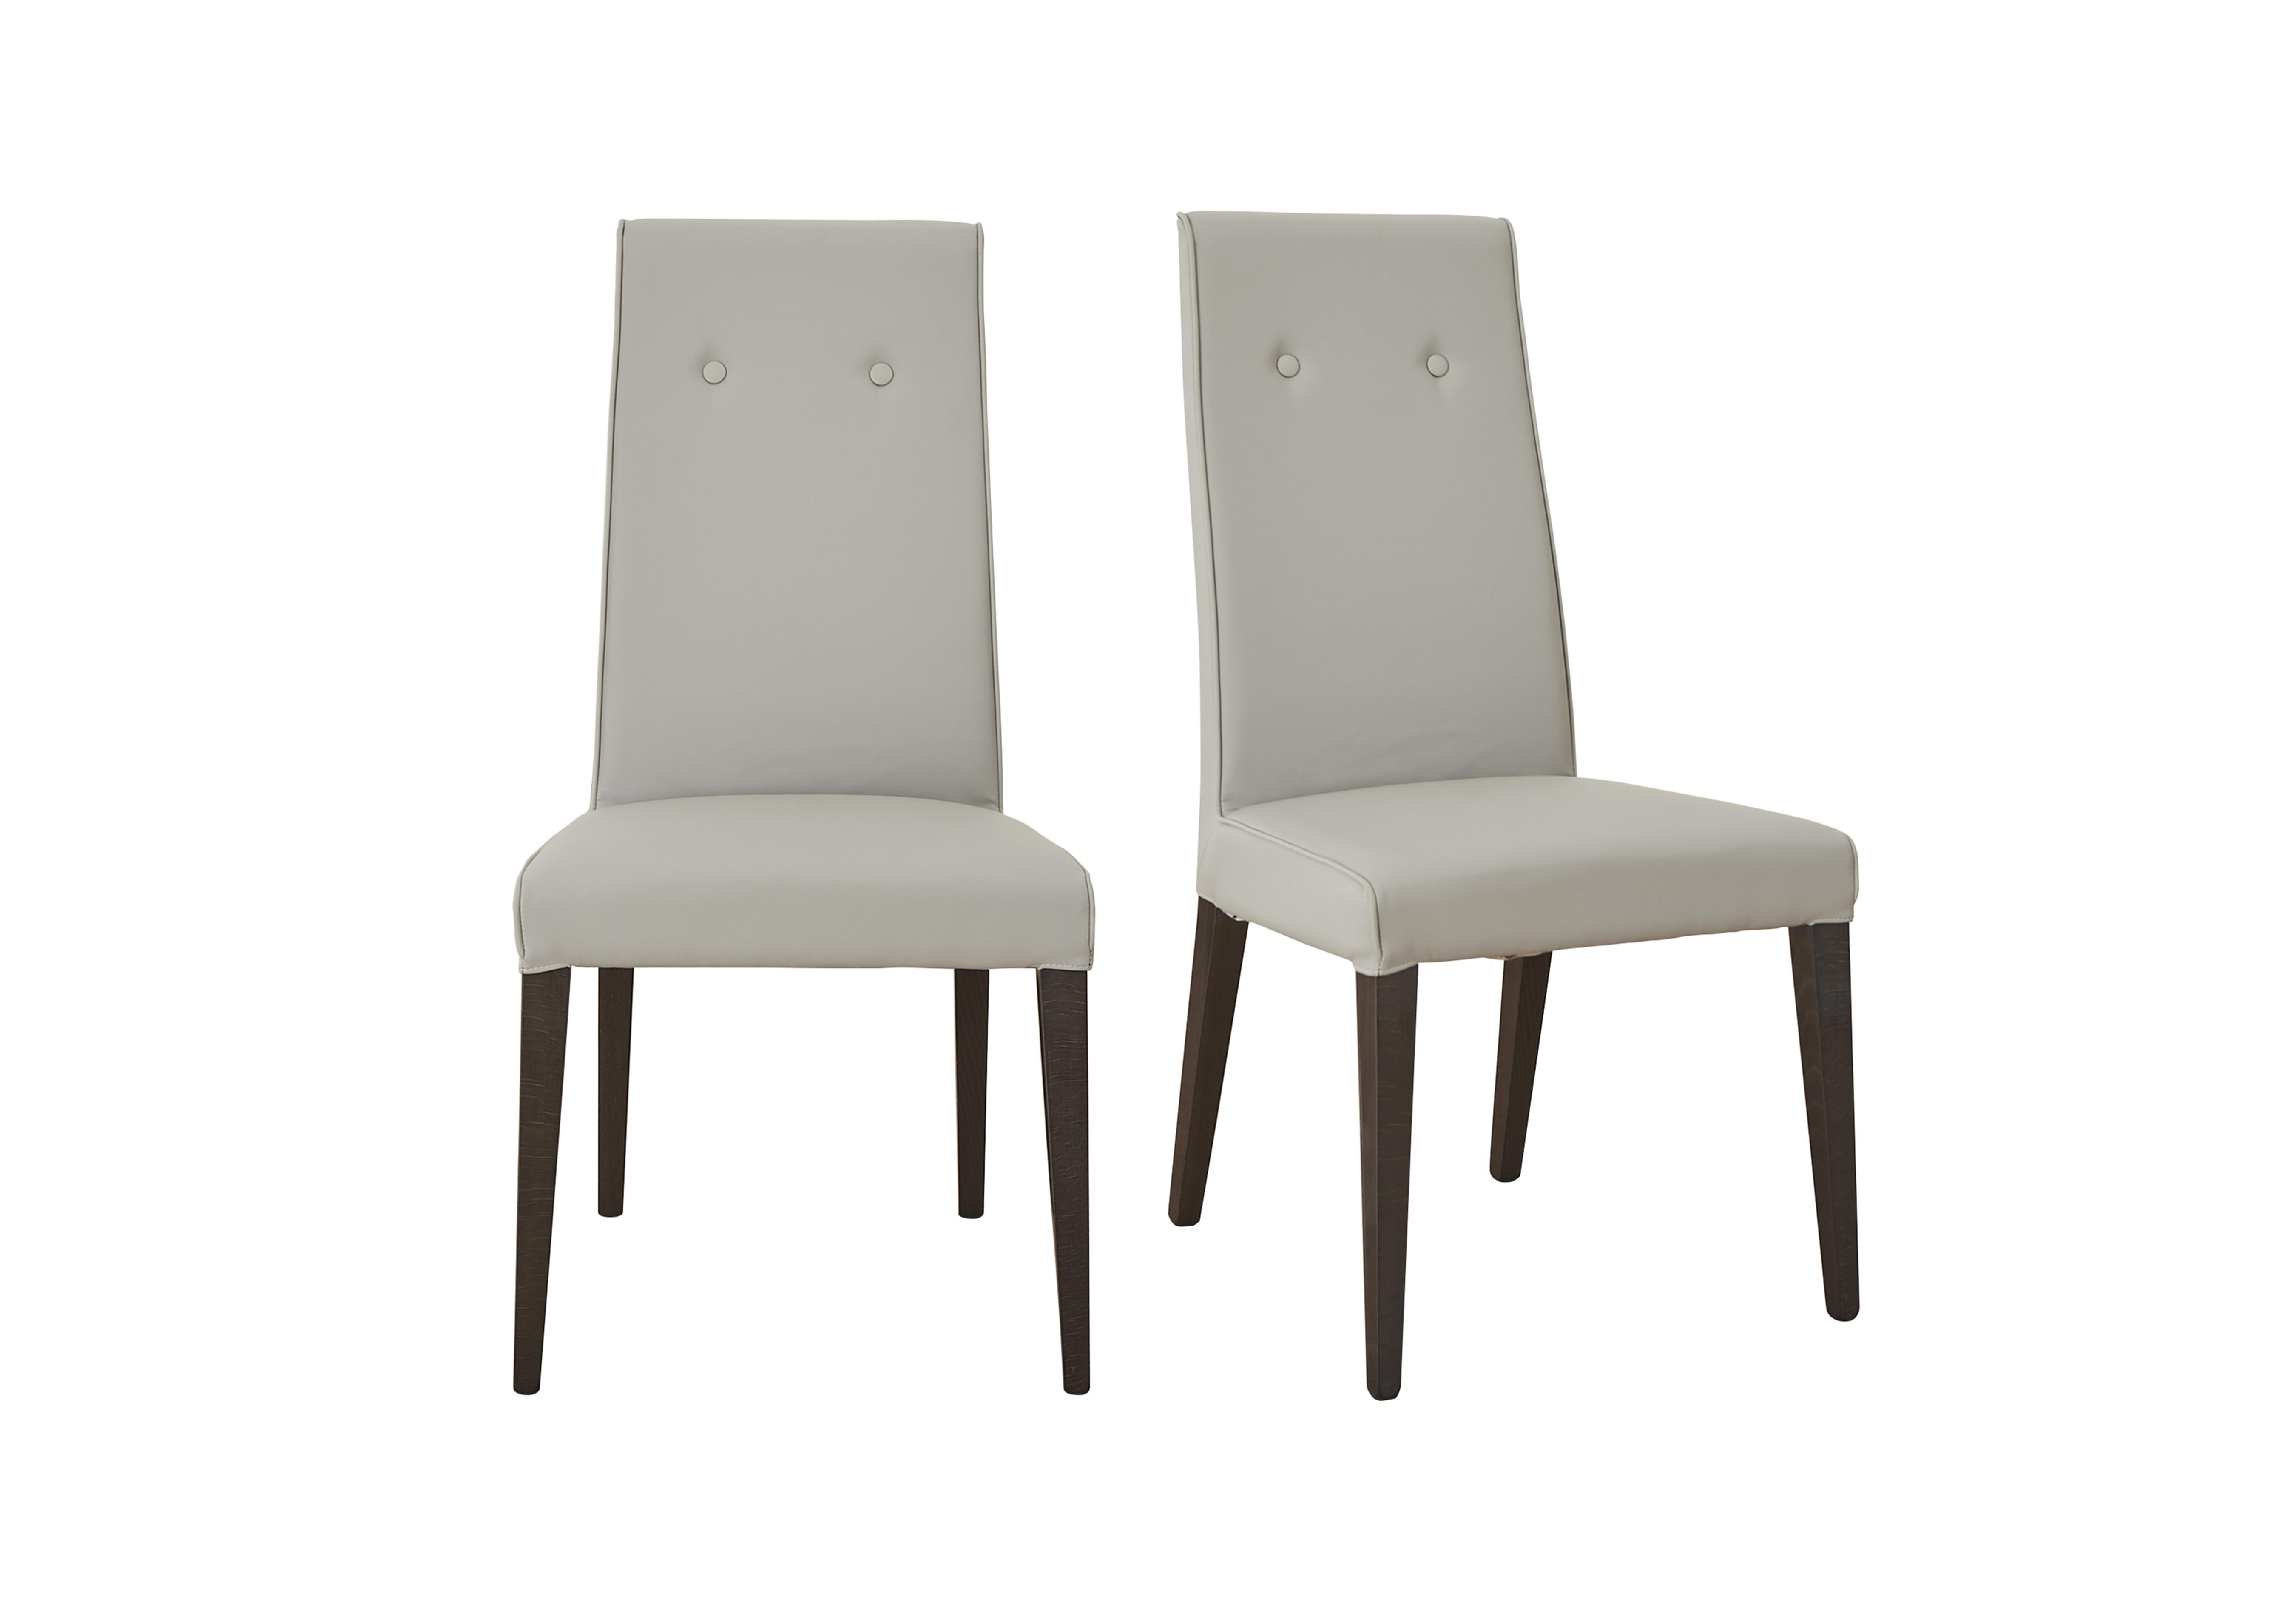 St Moritz Pair of Faux Leather Upholstered Dining Chairs in  on Furniture Village